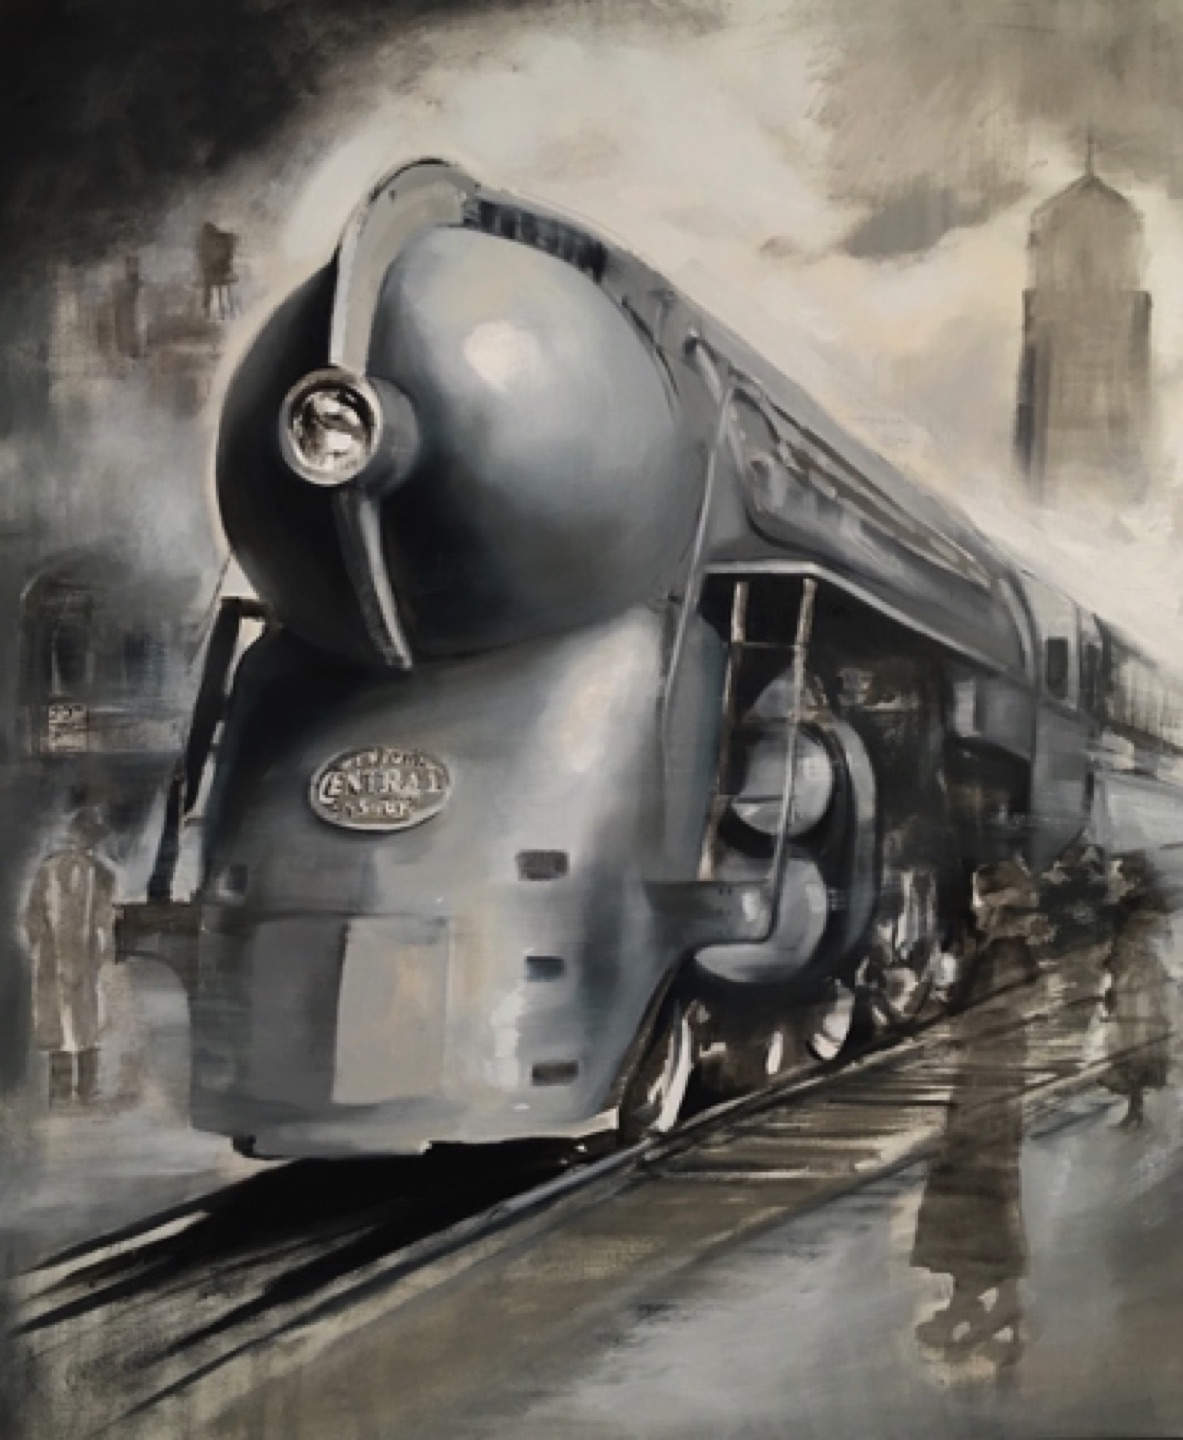 Gregg Chadwick
Mystery Train (20th Century Limited)
60”x50” oil on linen 2016
Pepi Kelman & Coles Brewer Collection, Pacific Palisades, California